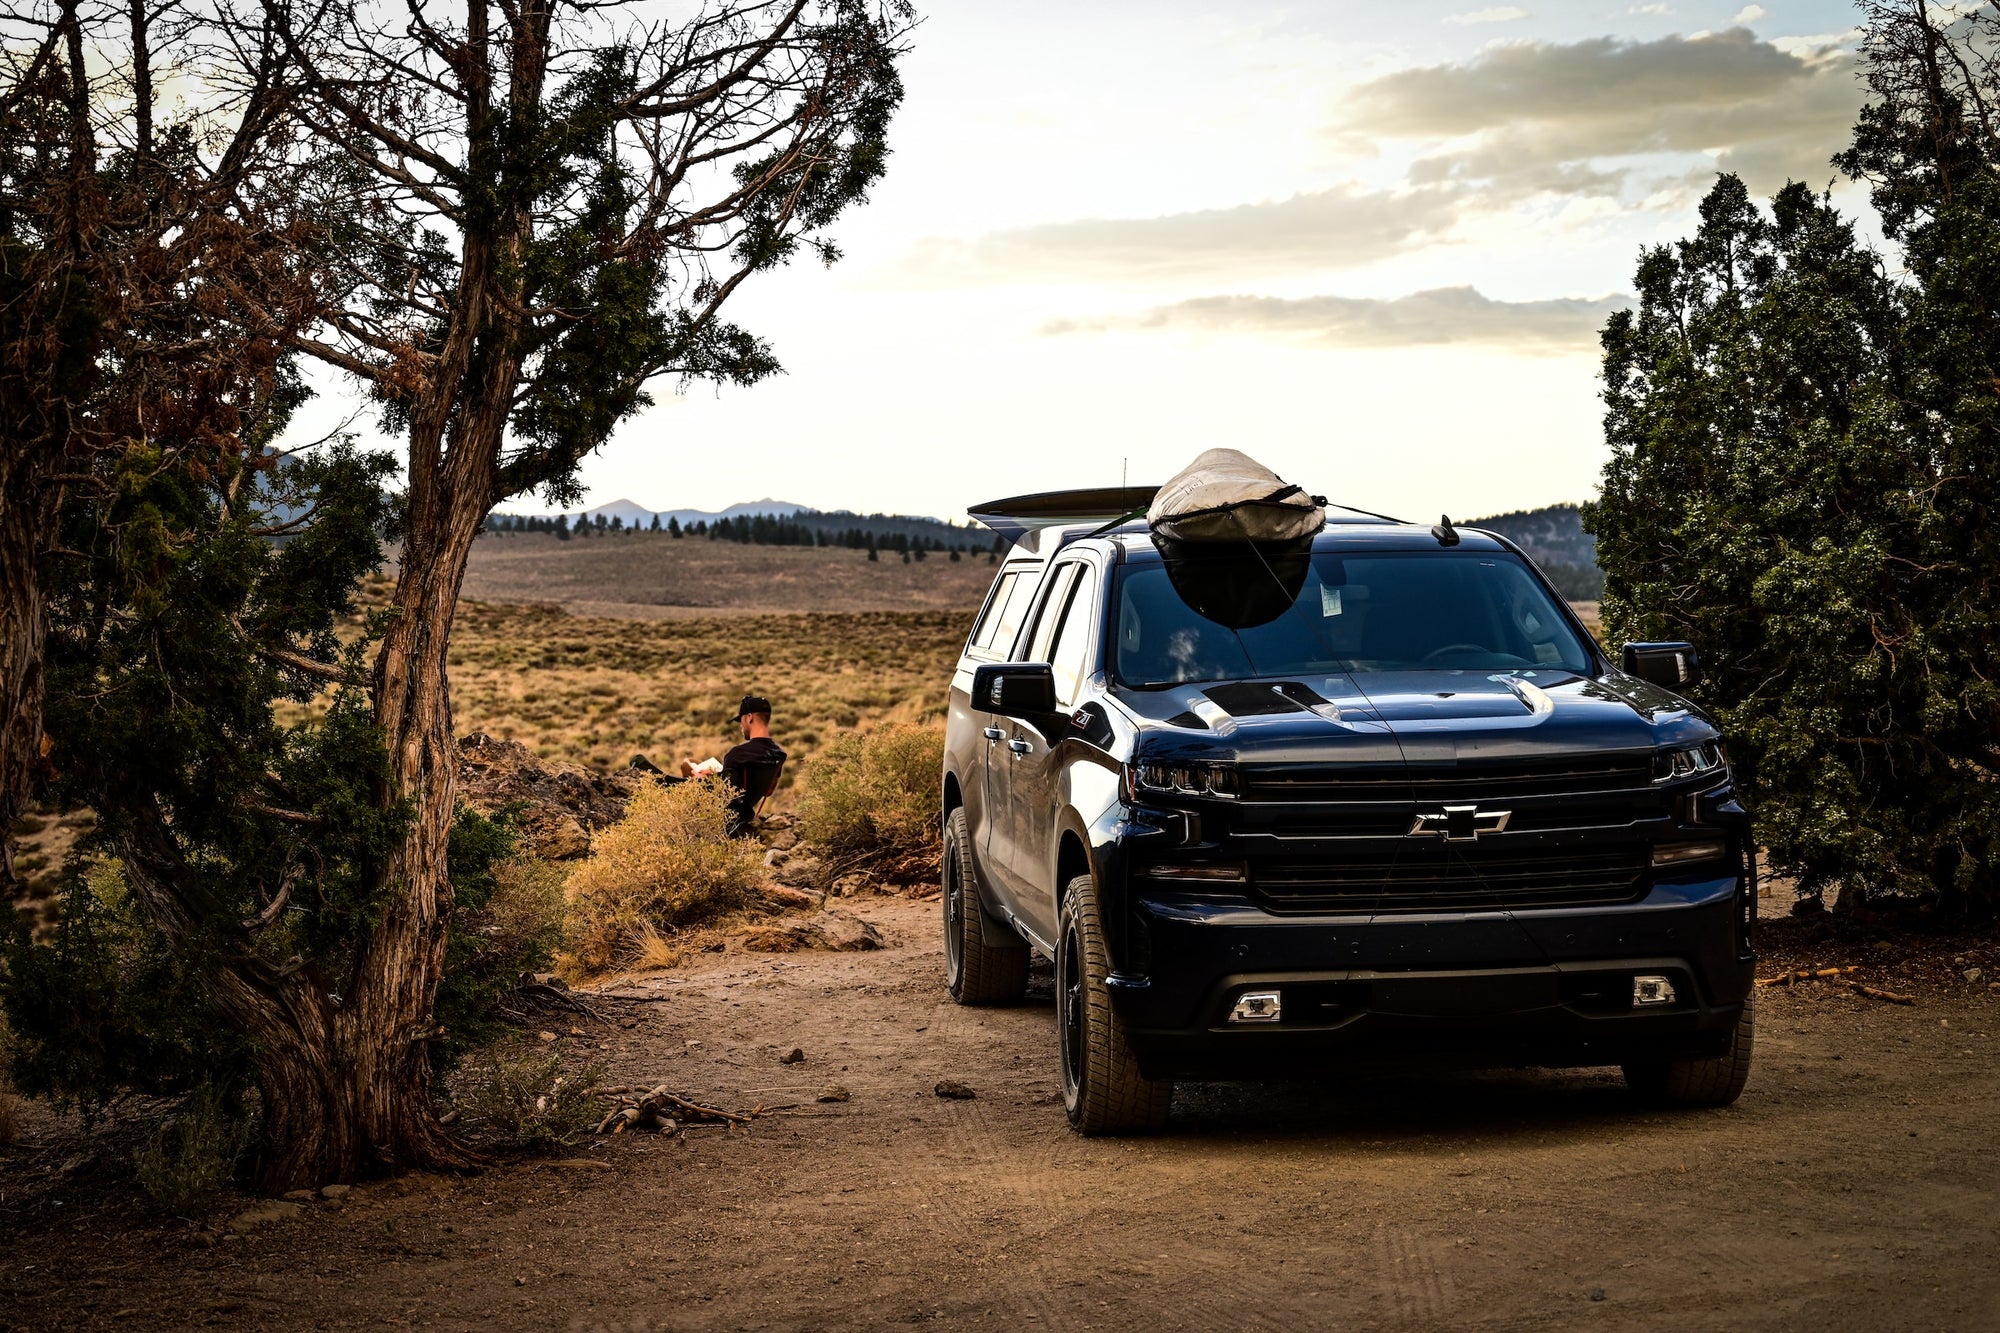 Chevy Silverado 1500 Vs 2500: Which Is Right For You?